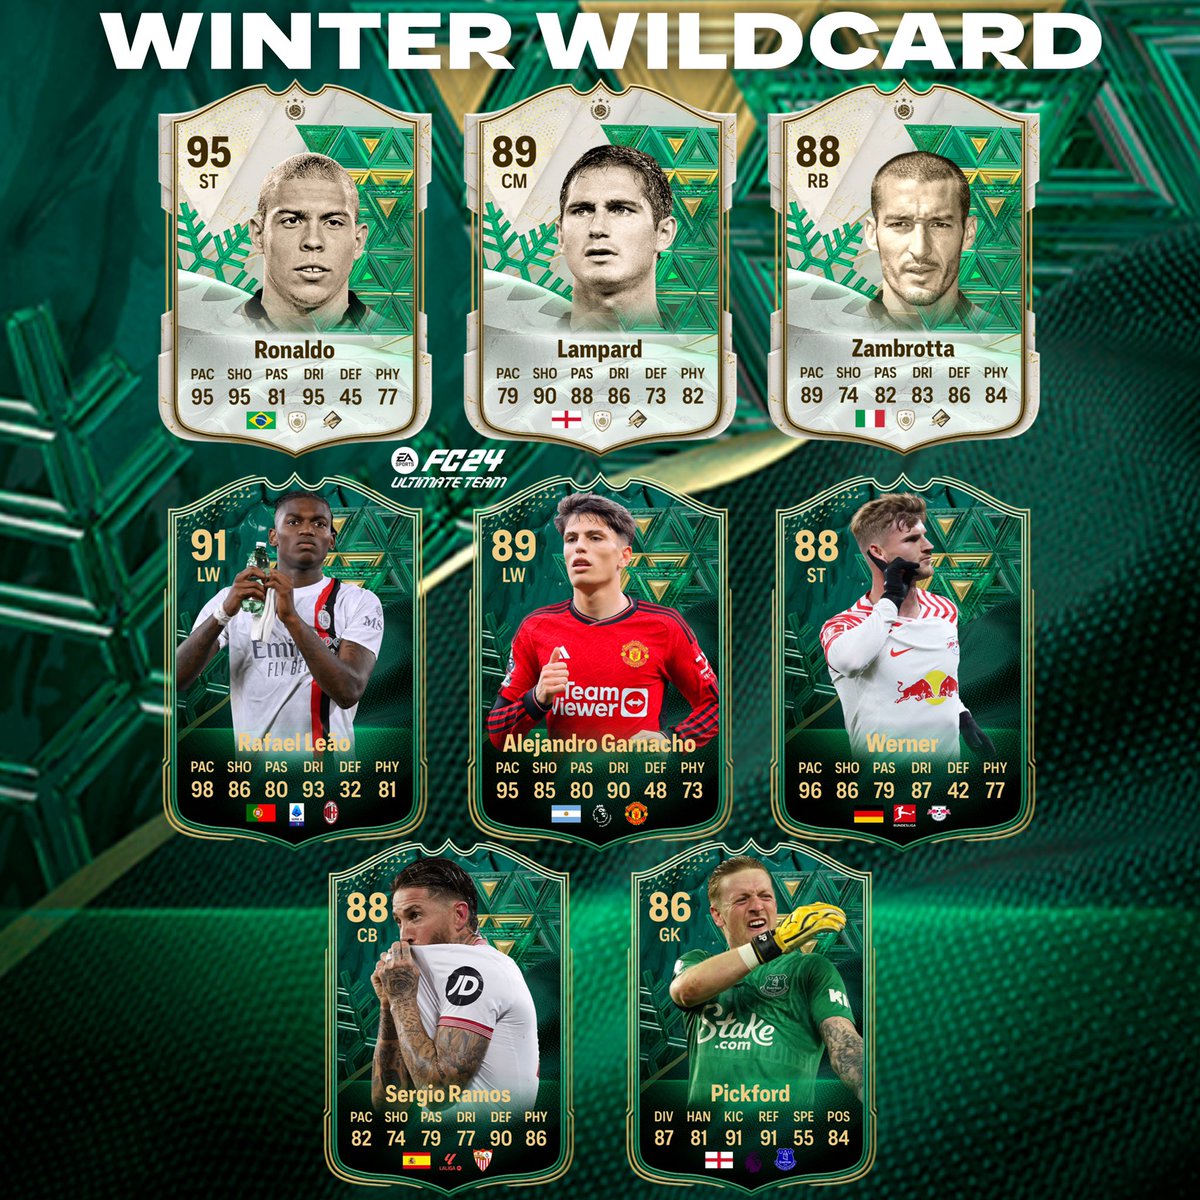 ❄️Winter Wildcard❄️ 
Confirmed Promo Coming Soon

Here some players who I think we may see.

#eafc #fc24 #safc #evfc #winter